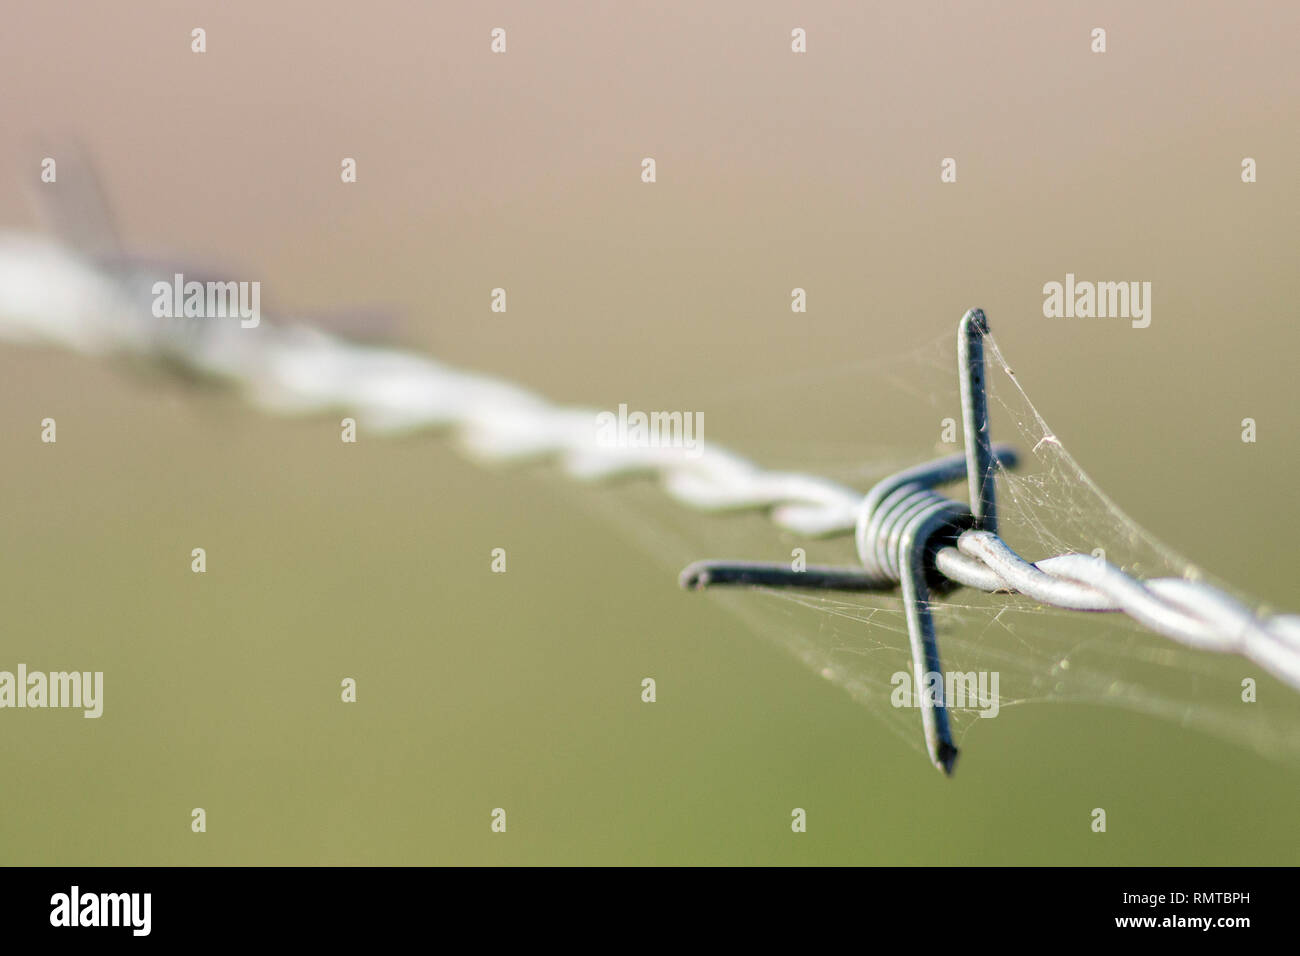 Close up of barbed wire with cobweb and out of focus agrarian field in the background Stock Photo